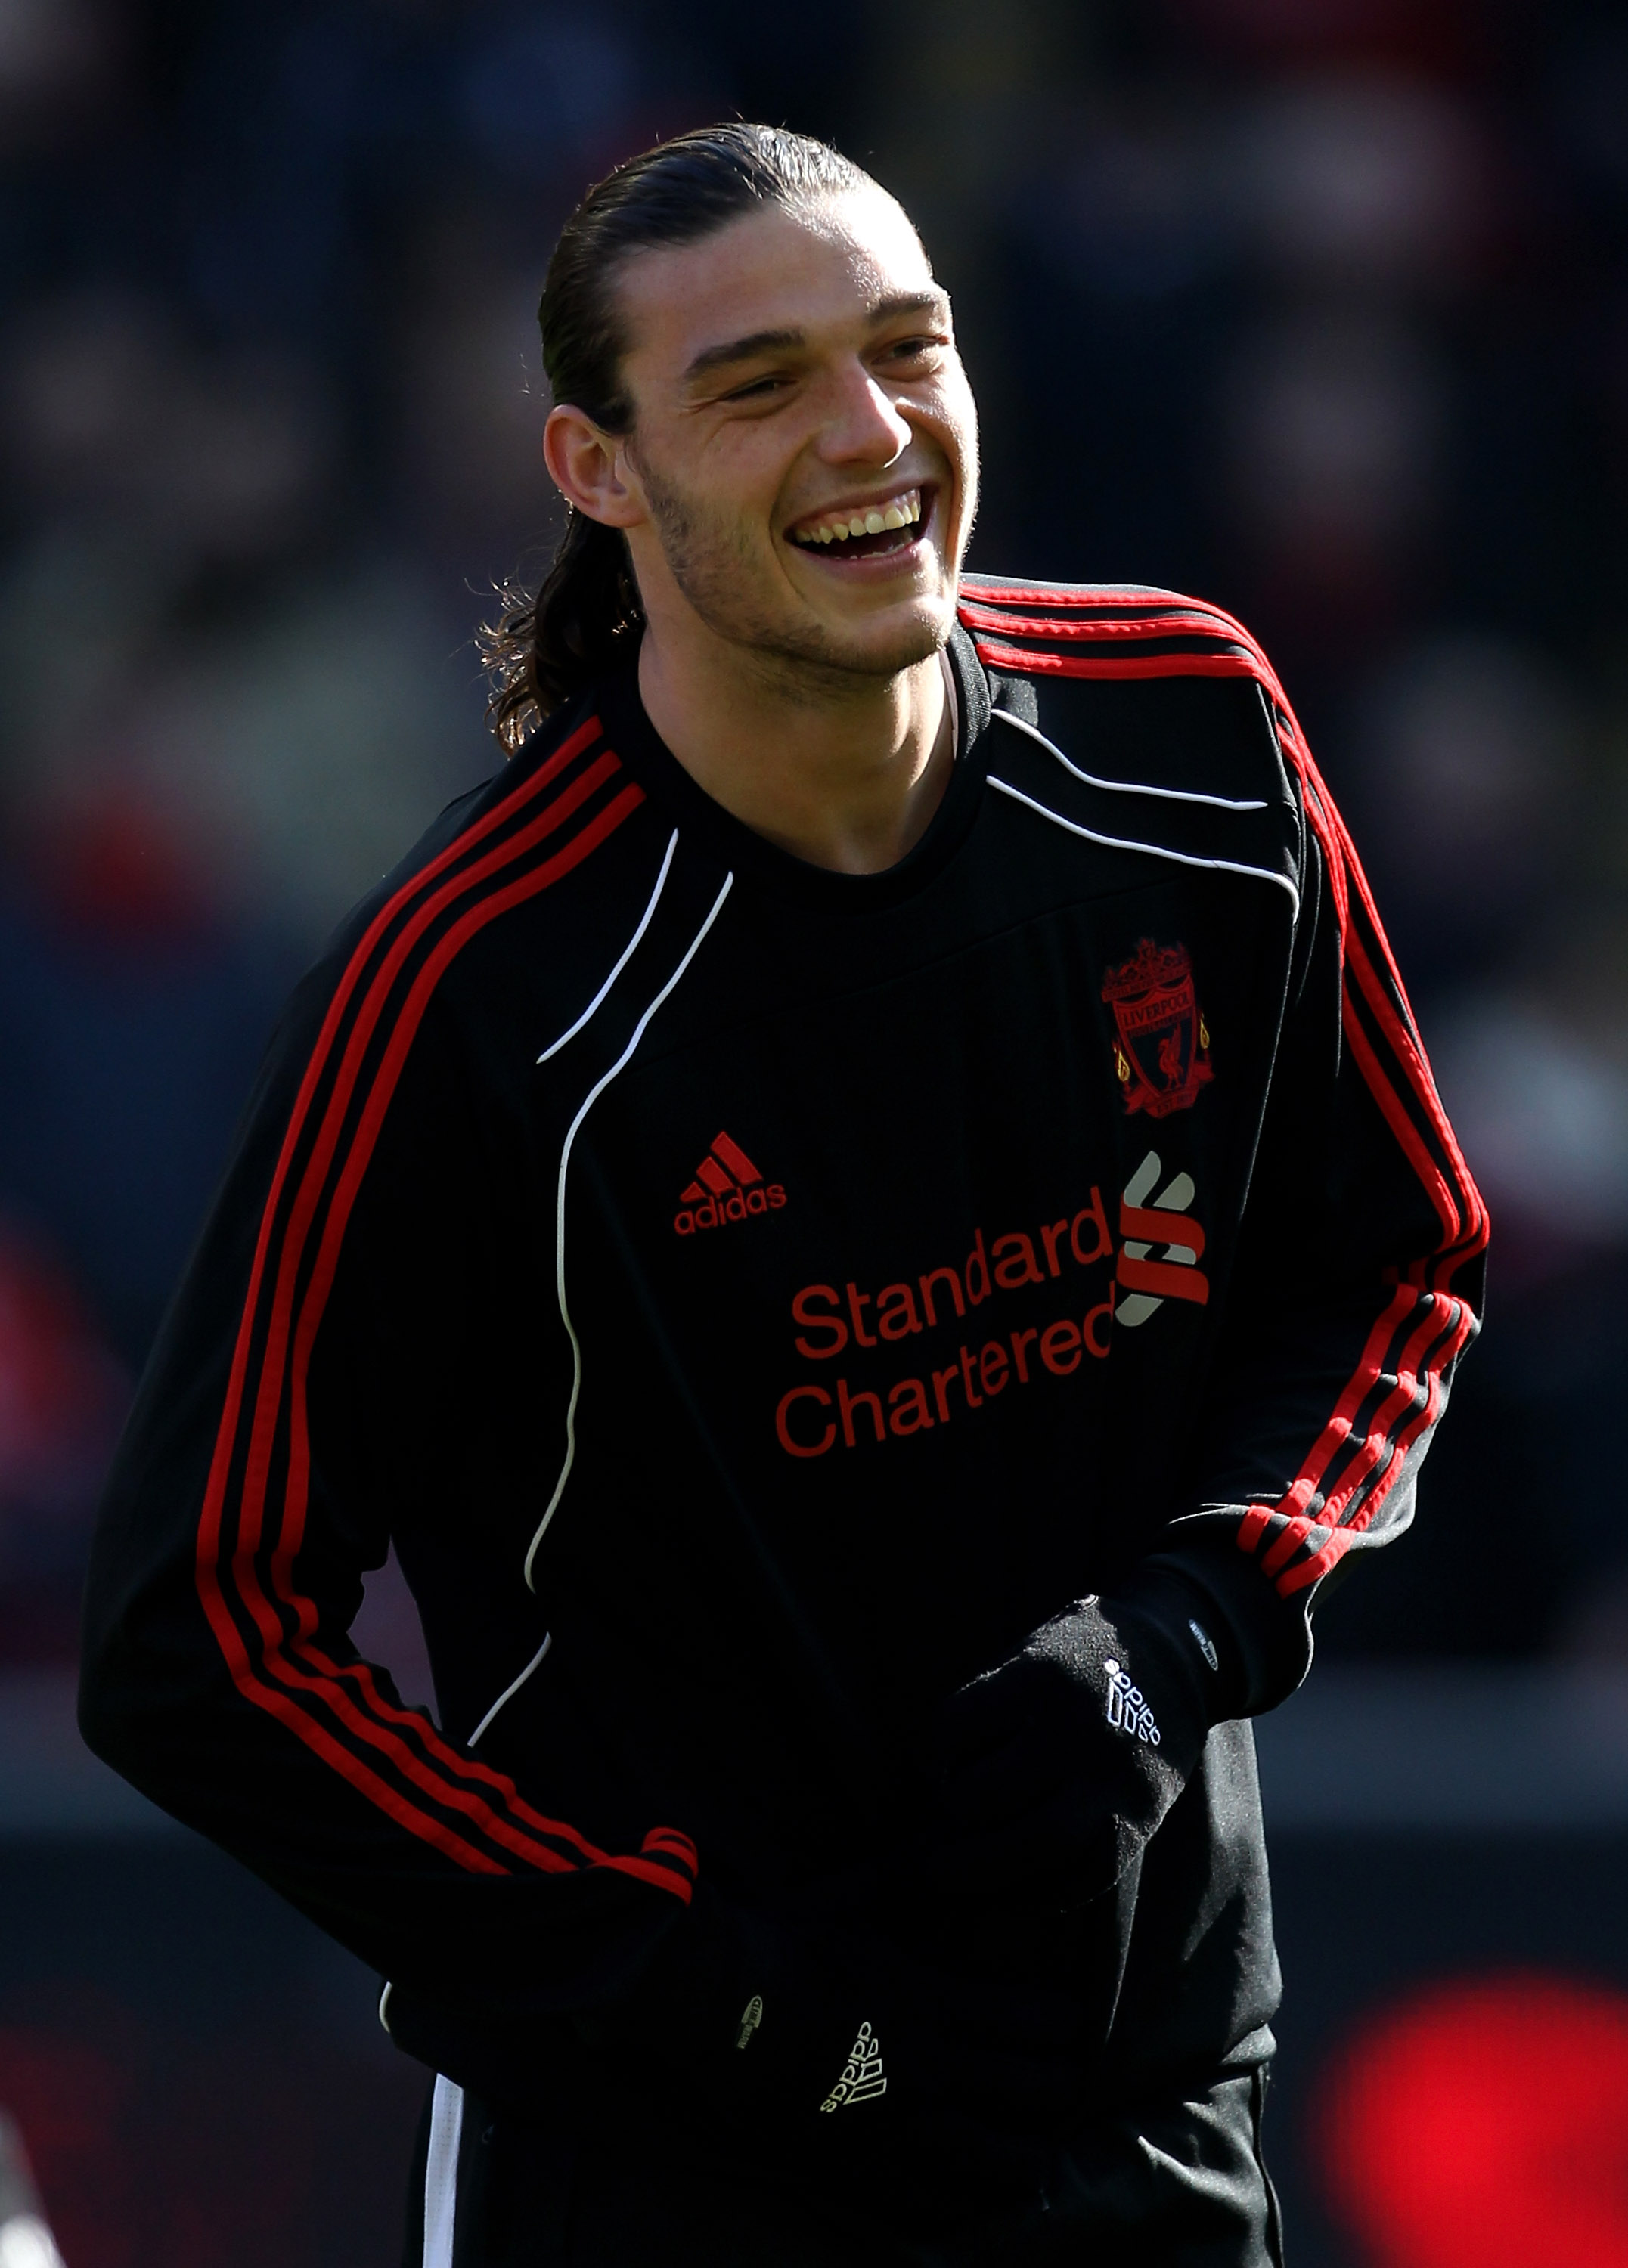 LIVERPOOL, UNITED KINGDOM - MARCH 06:  Andy Carroll of Liverpool warms up prior to the Barclays Premier League match between Liverpool and Manchester United at Anfield on March 6, 2011 in Liverpool, England. (Photo by Alex Livesey/Getty Images)